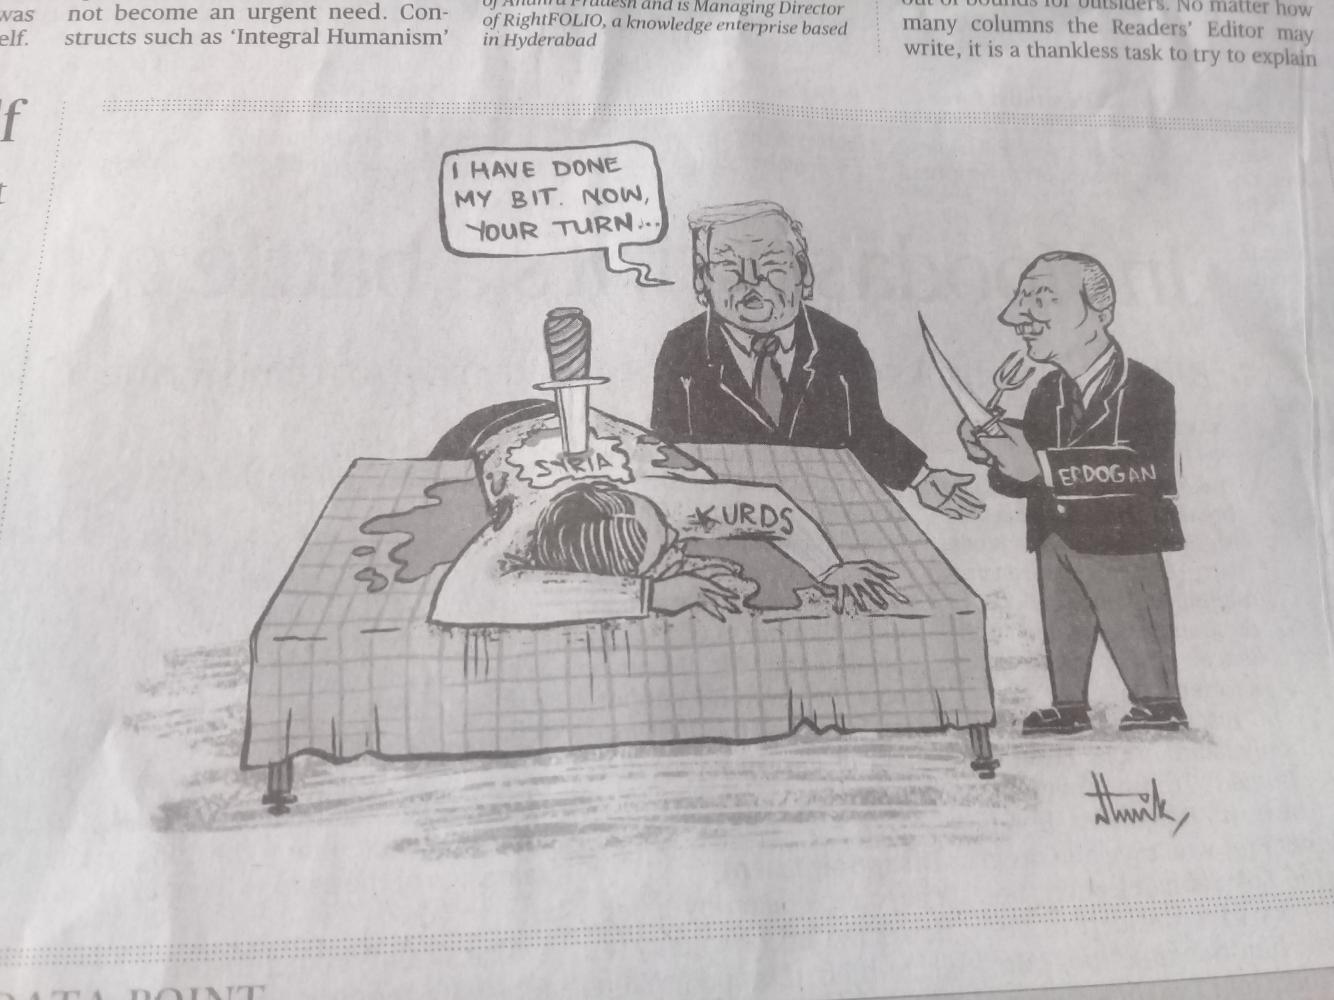 A political cartoon seen in Indian news paper on Kurds - Society, Politics,  Government, Environment, Current Events  Forum